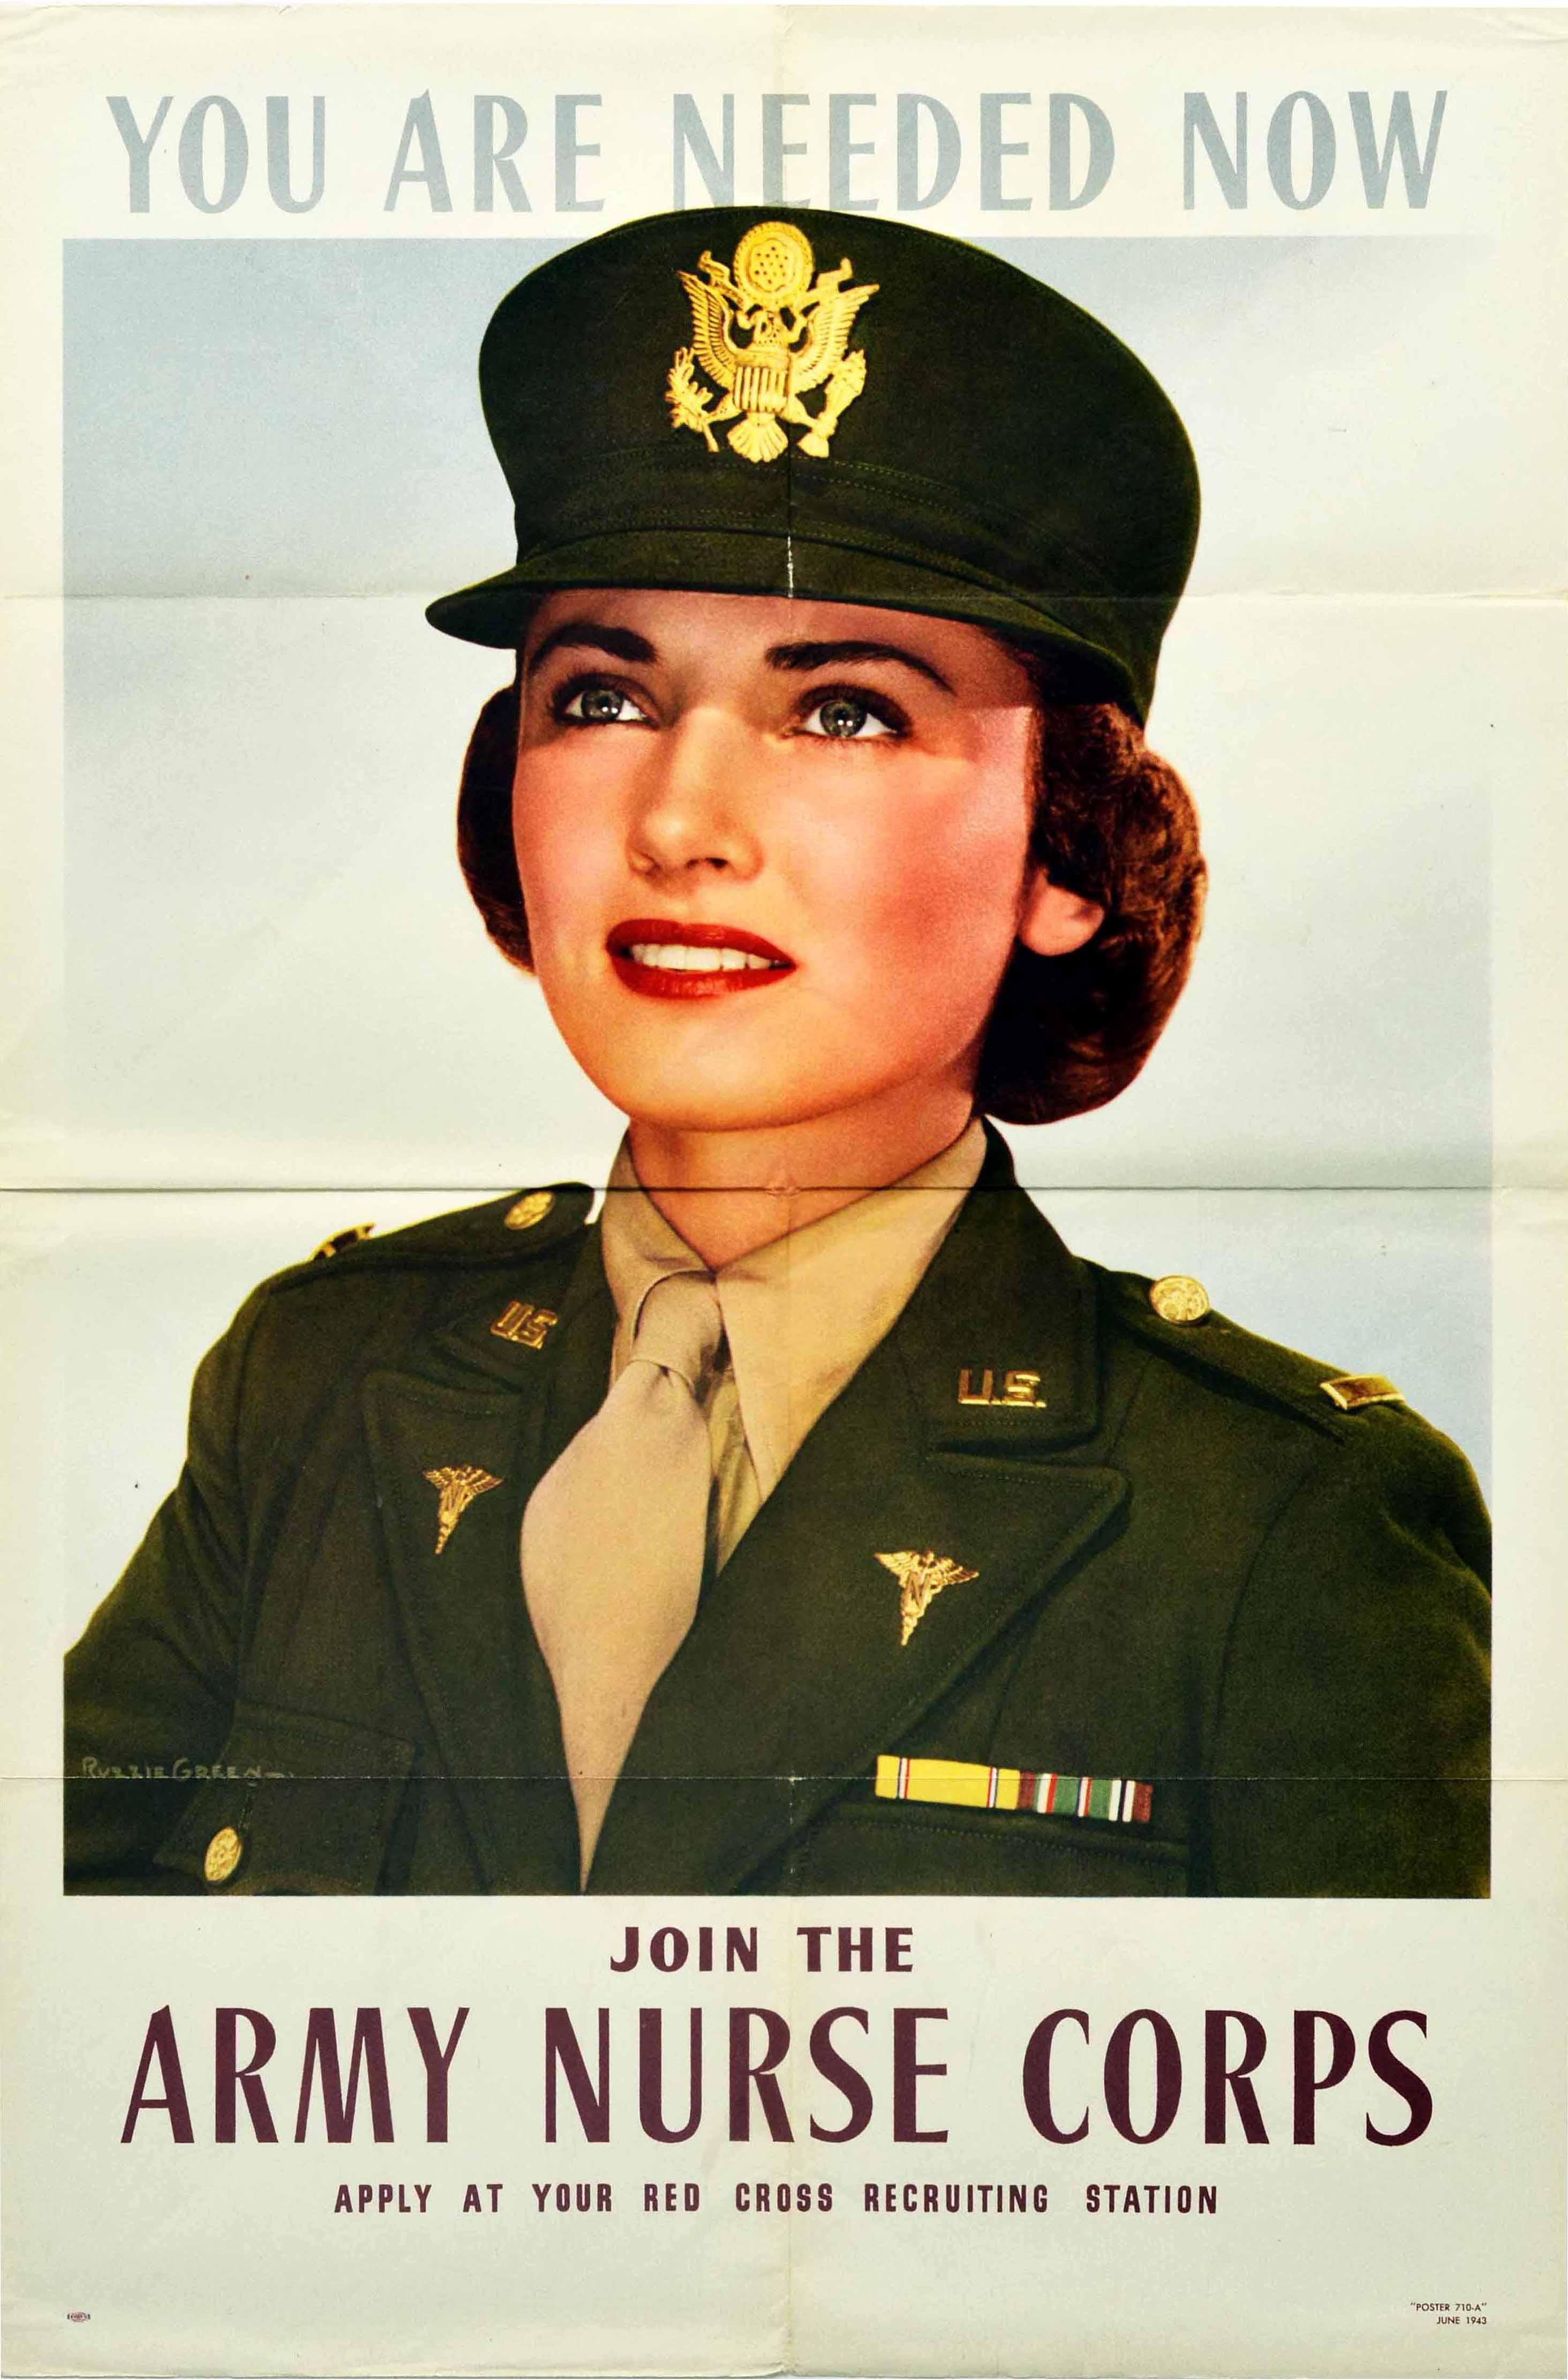 Ruzzie Green Print - Original Vintage Poster Join The Army Nurse Corps WWII Red Cross Recruitment USA